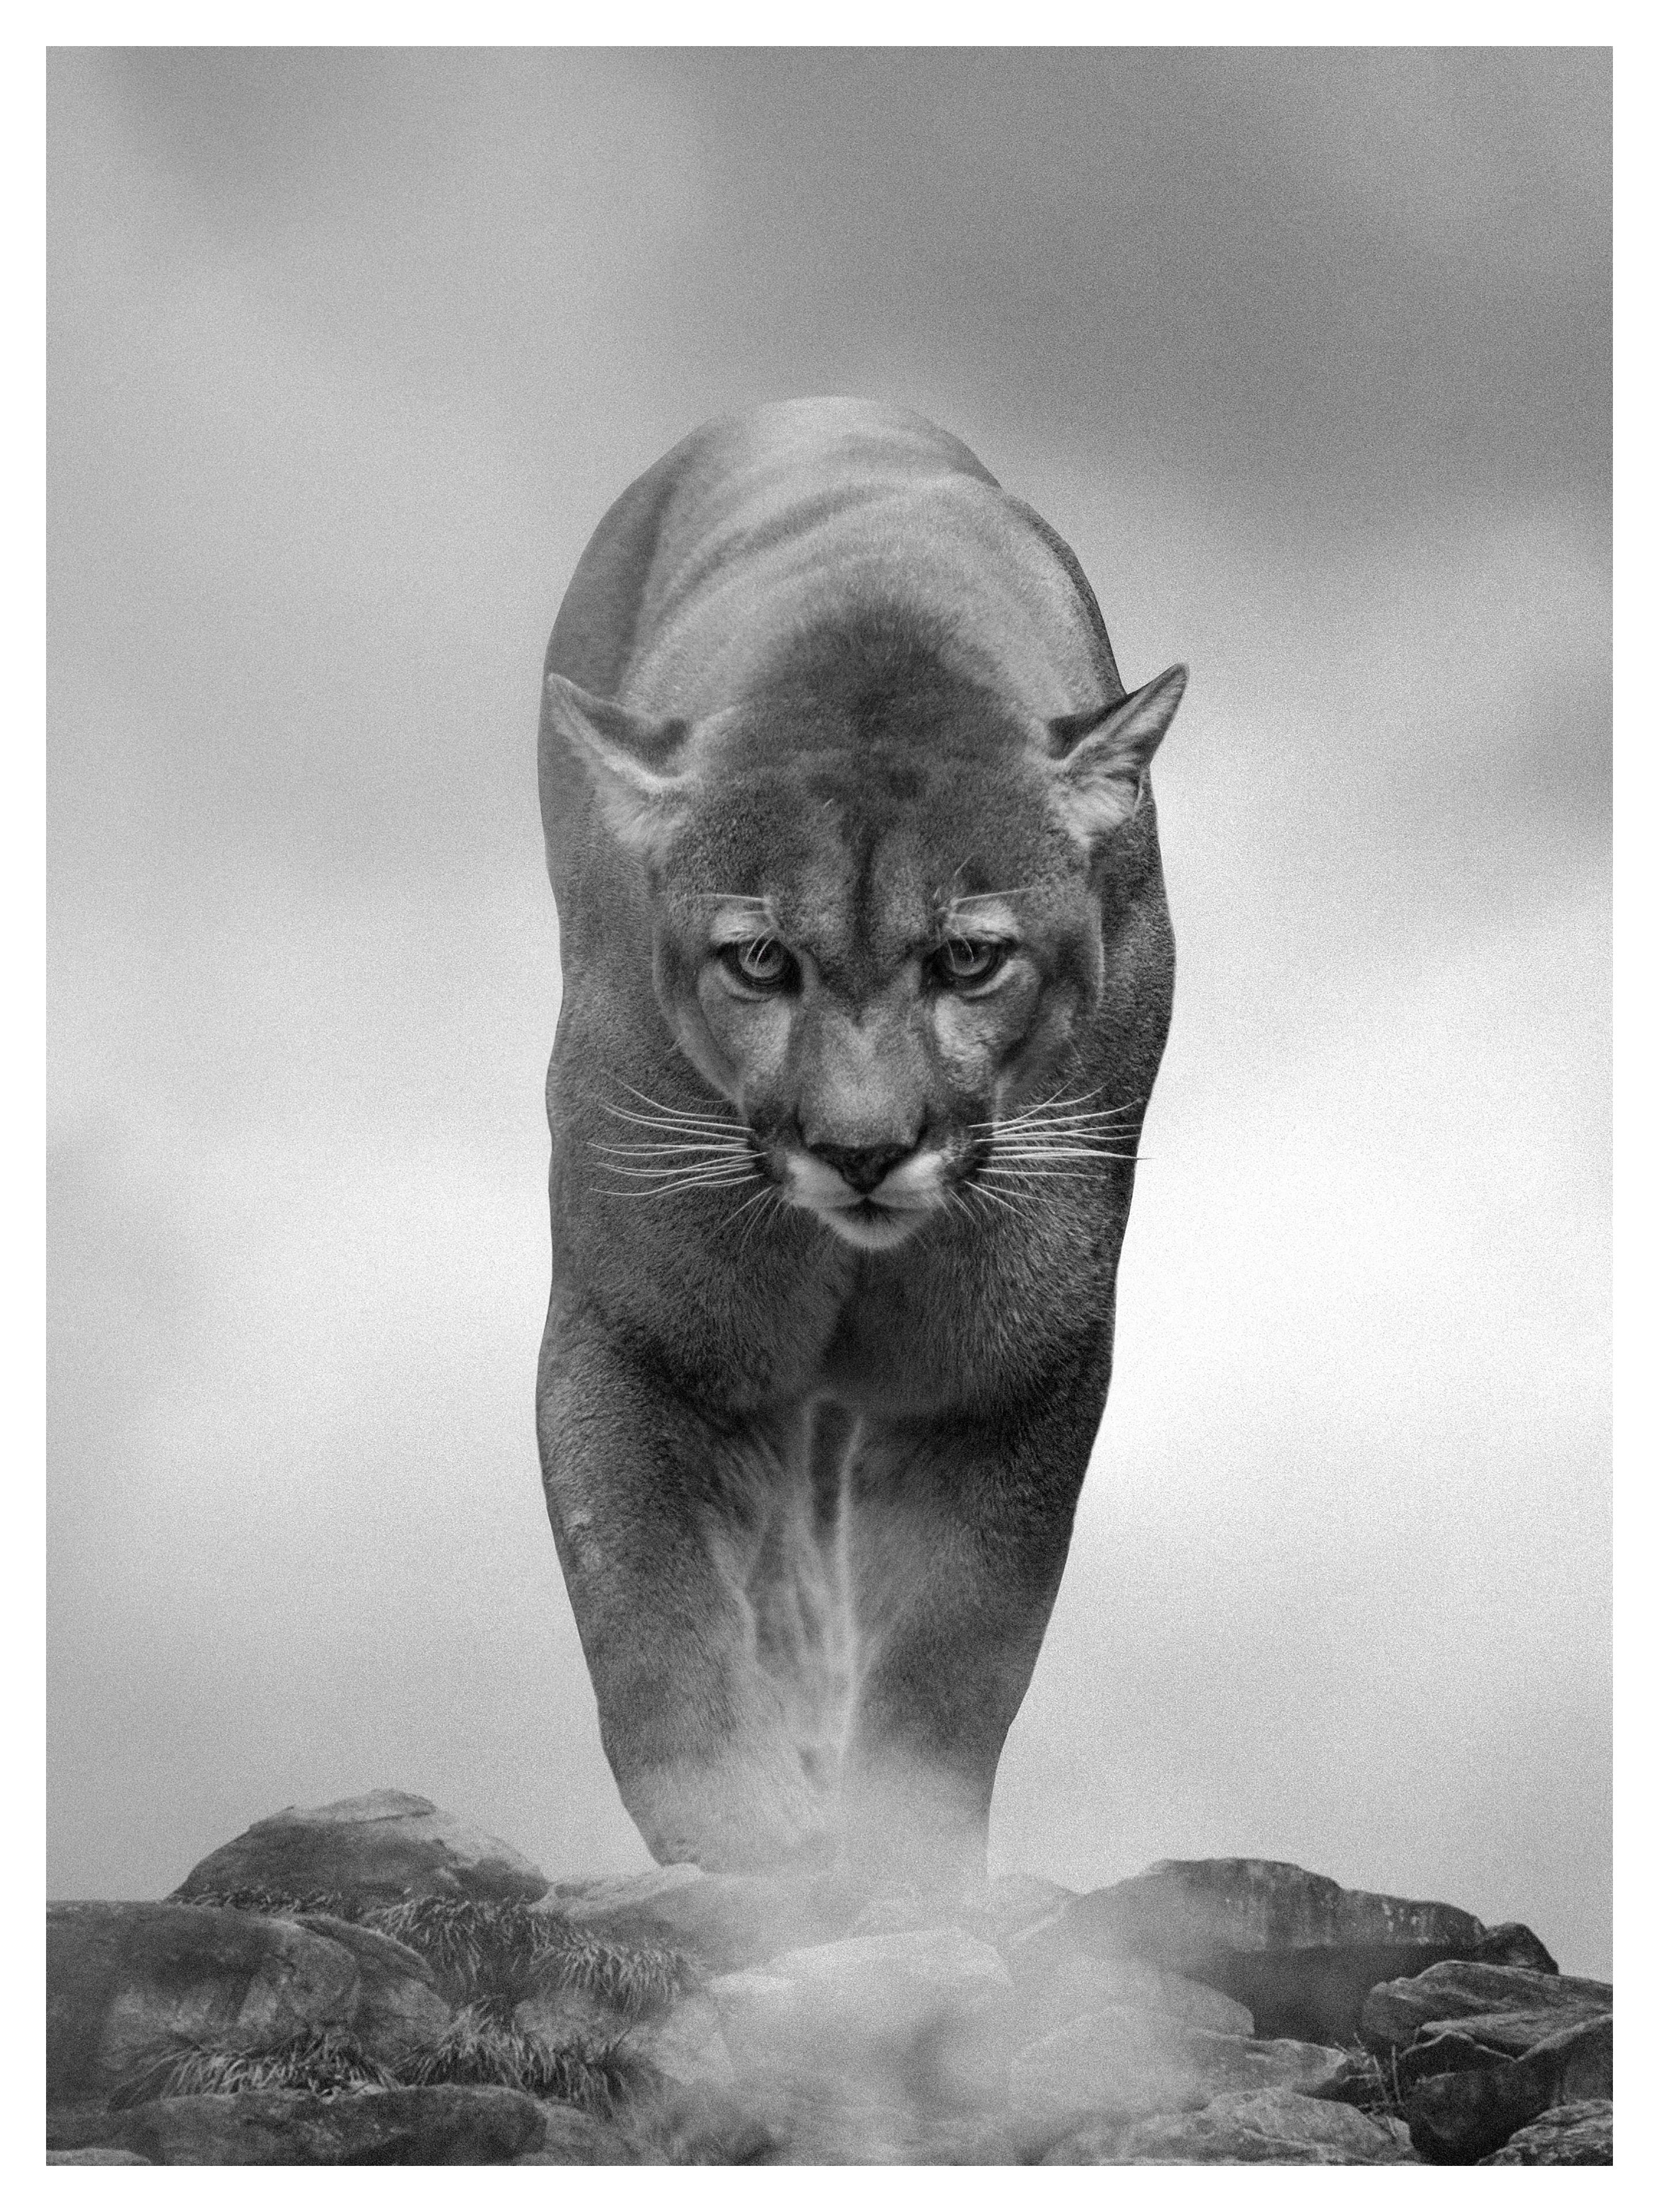 Shane Russeck Animal Print - King of the Mountain 40x60  Black & White Photography, Cougar, Mountain Lion 